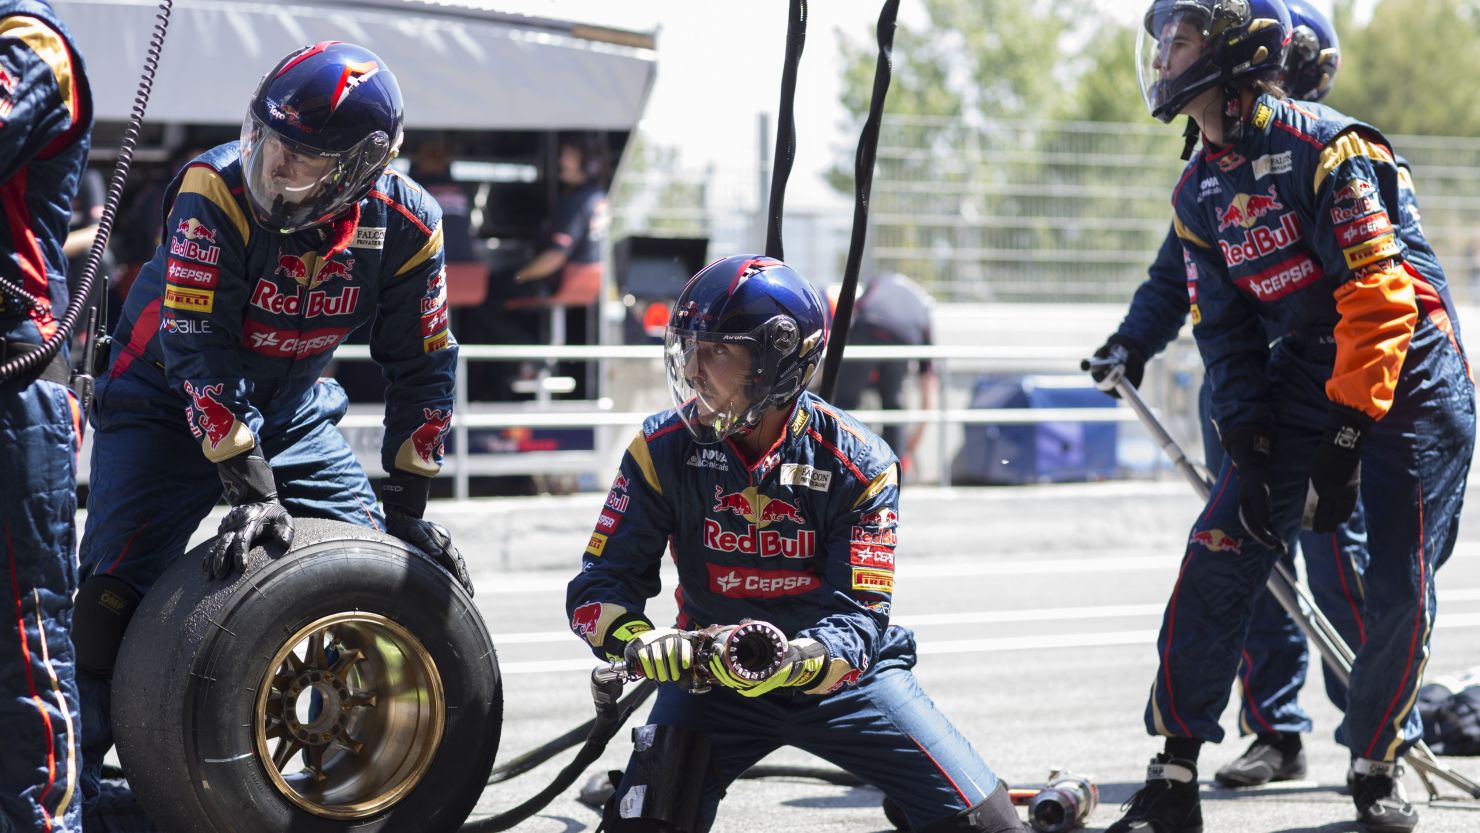 Mechanics in the pit lanes were kept extremely busy during Sunday's Grand Prix, which featured 82 pit stops.